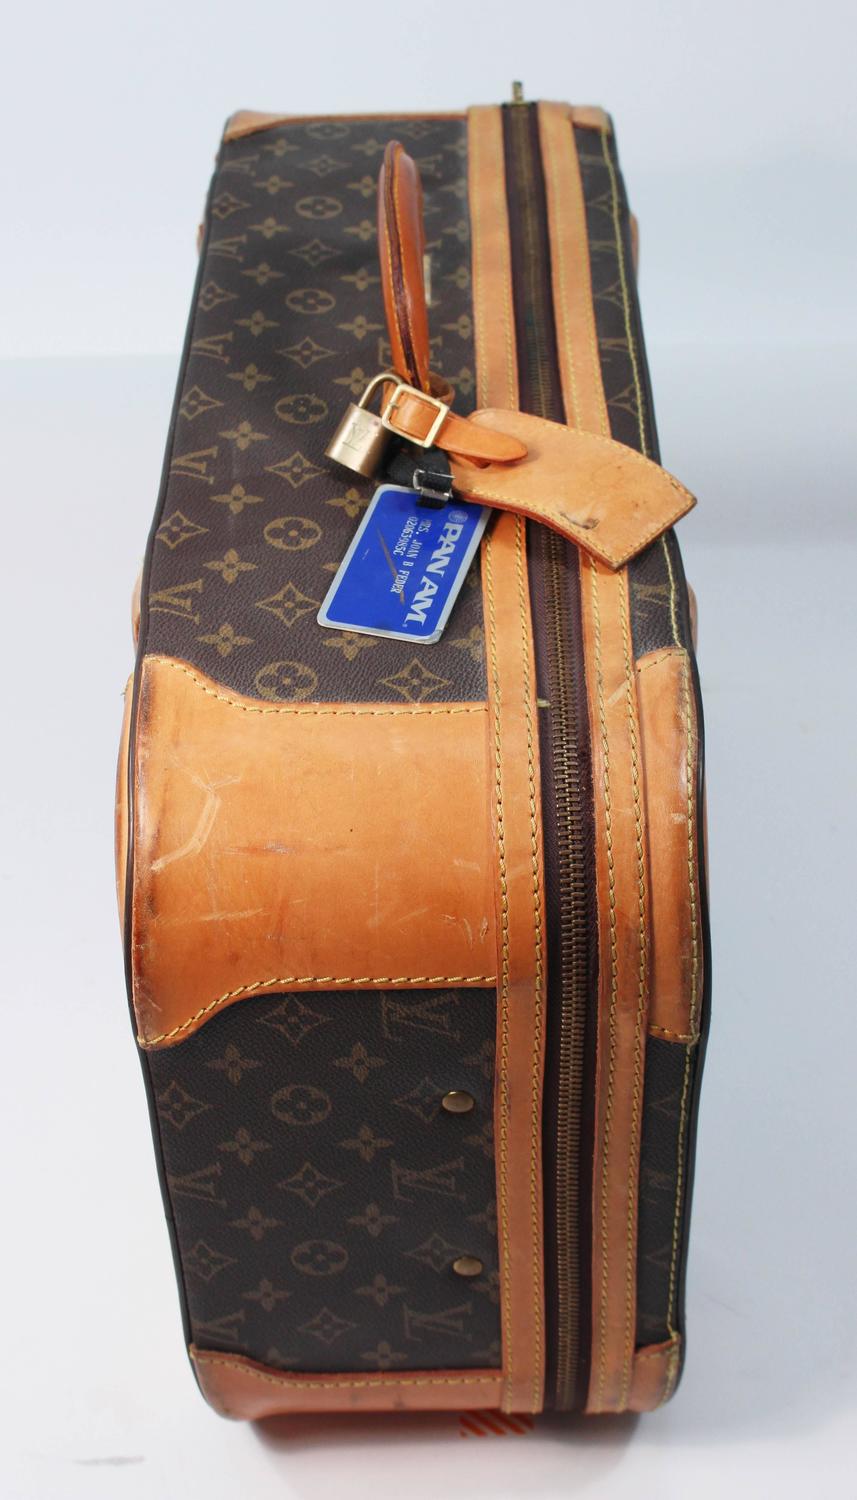 LOUIS VUITTON Vintage Carry On Suitcase Weekend Bag For Sale at 1stdibs